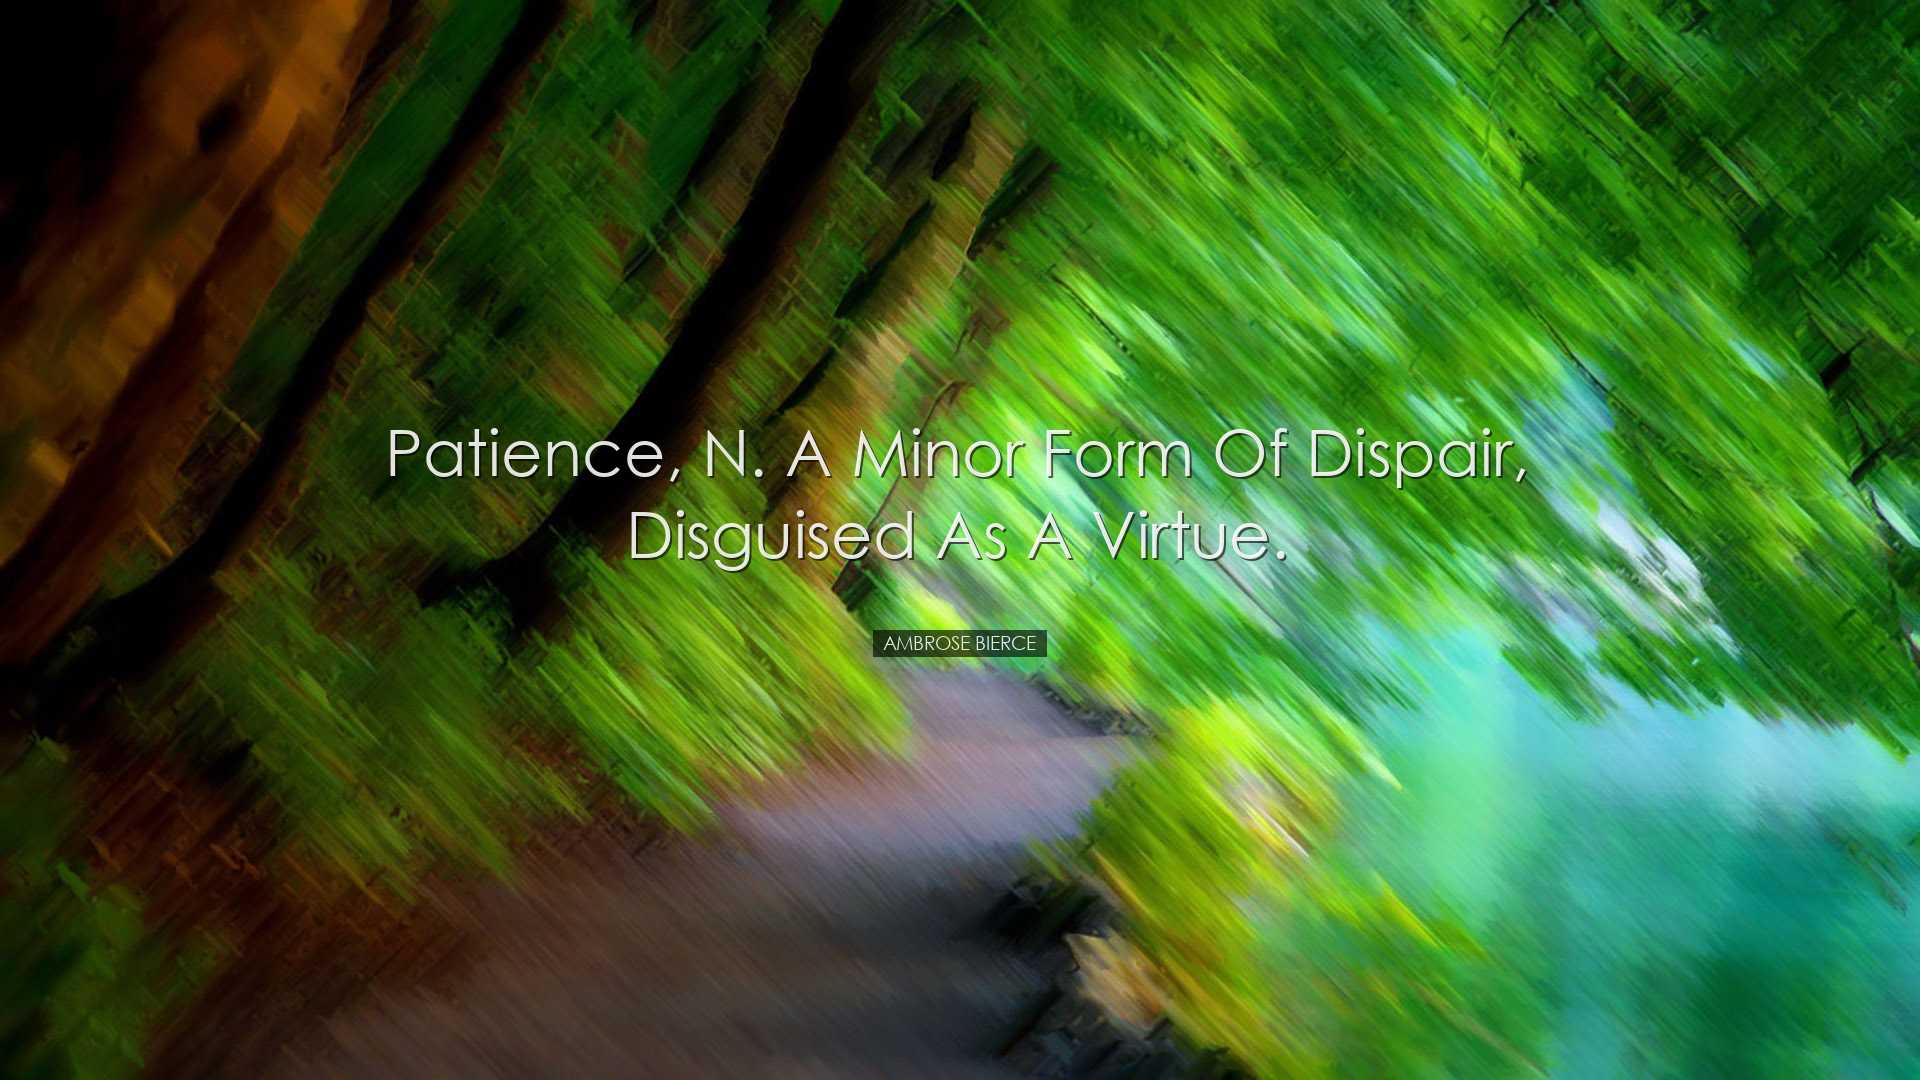 Patience, n. A minor form of dispair, disguised as a virtue. - Amb